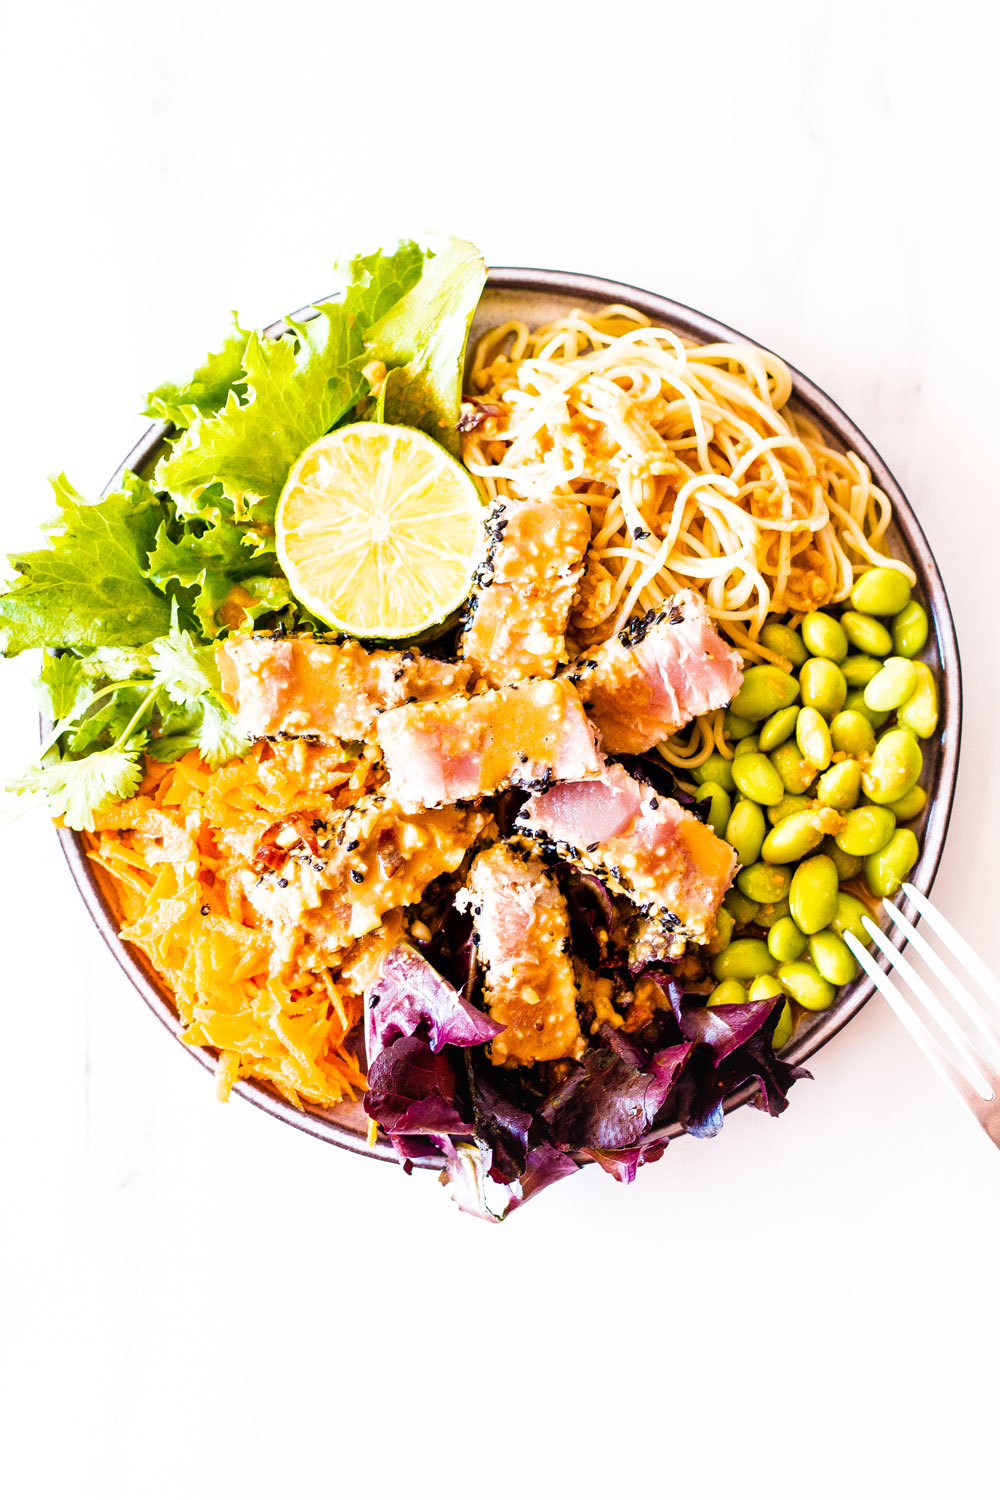 Whether you're searching for a weeknight dinner or if you're tired of the same old canned tuna recipes, this Fresh Tuna Salad With Homemade Peanut Dressing has you covered! https://www.spotebi.com/recipes/fresh-tuna-salad-homemade-peanut-dressing/